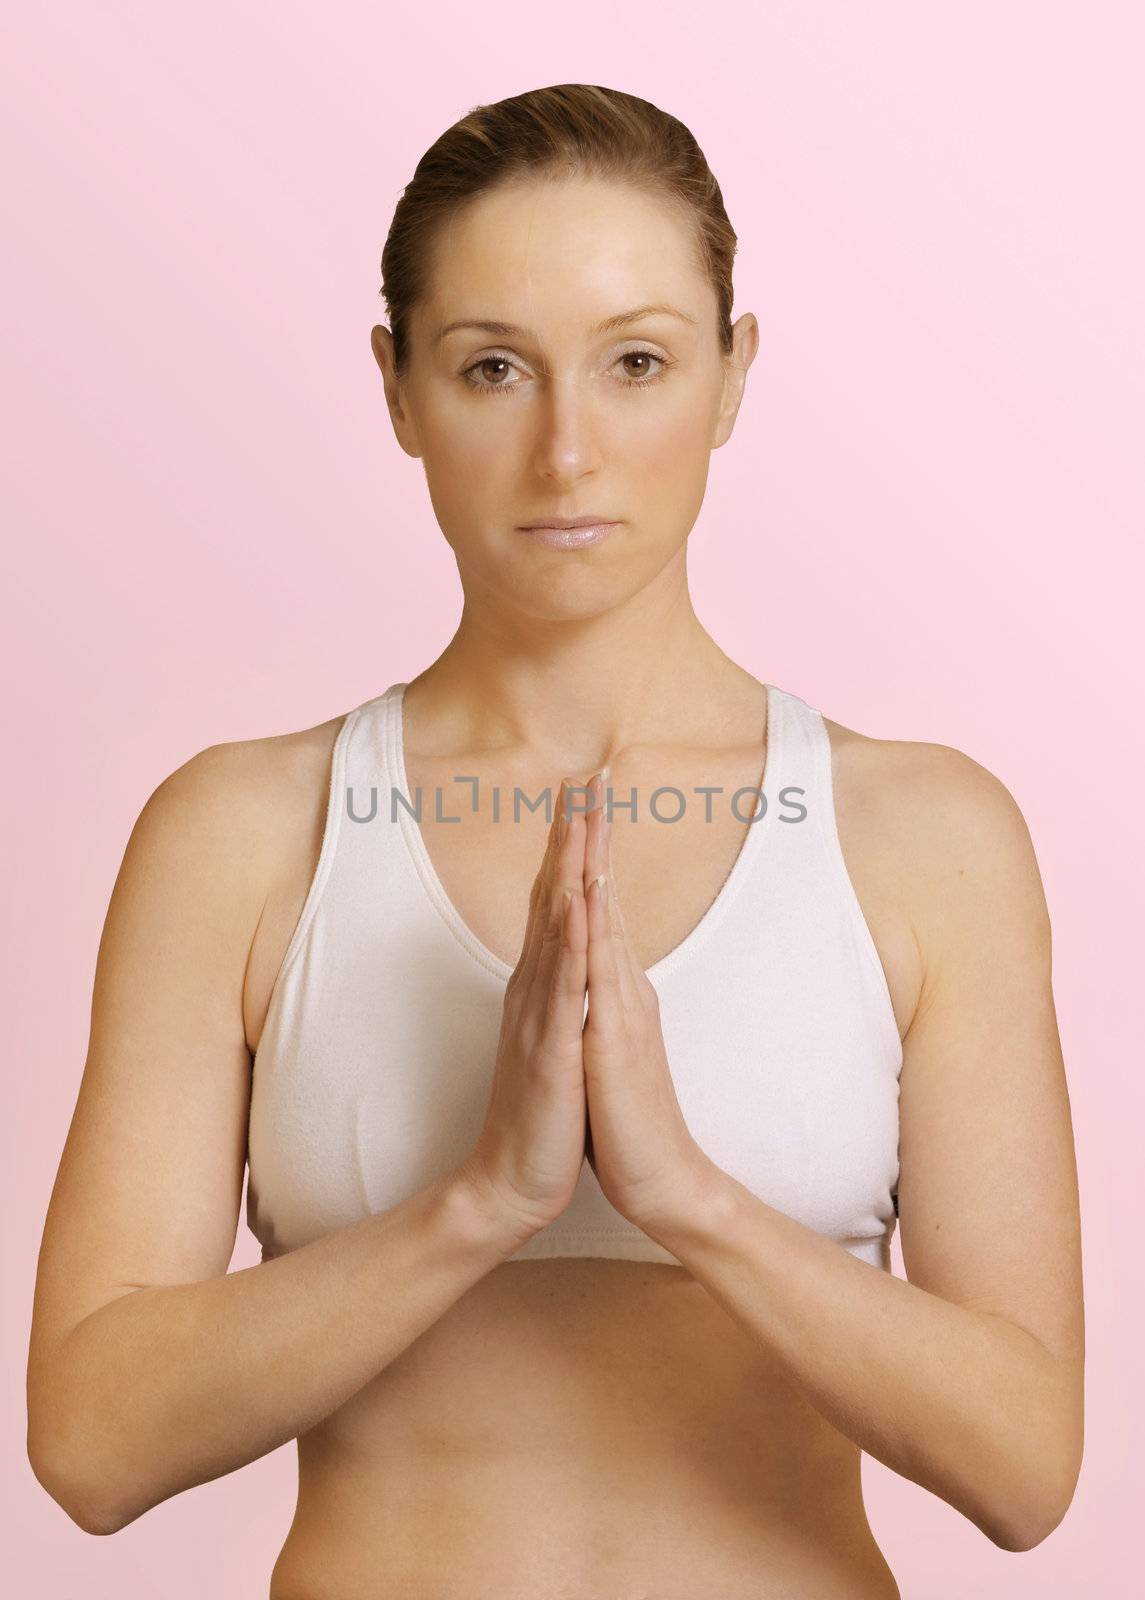 Anjali Mudra (Salutation Seal or Heart Seal)
This palms-together gesture completes an energetic circuit between the hands and the heart and harmonizes the two hemispheres of the brain

Seated postion.  Hands must be in front of the heart.
Reduces stress and anxiety 
Calms the brain 
Creates flexibility in the hands, fingers, wrists, and arms 
Opens the heart 
